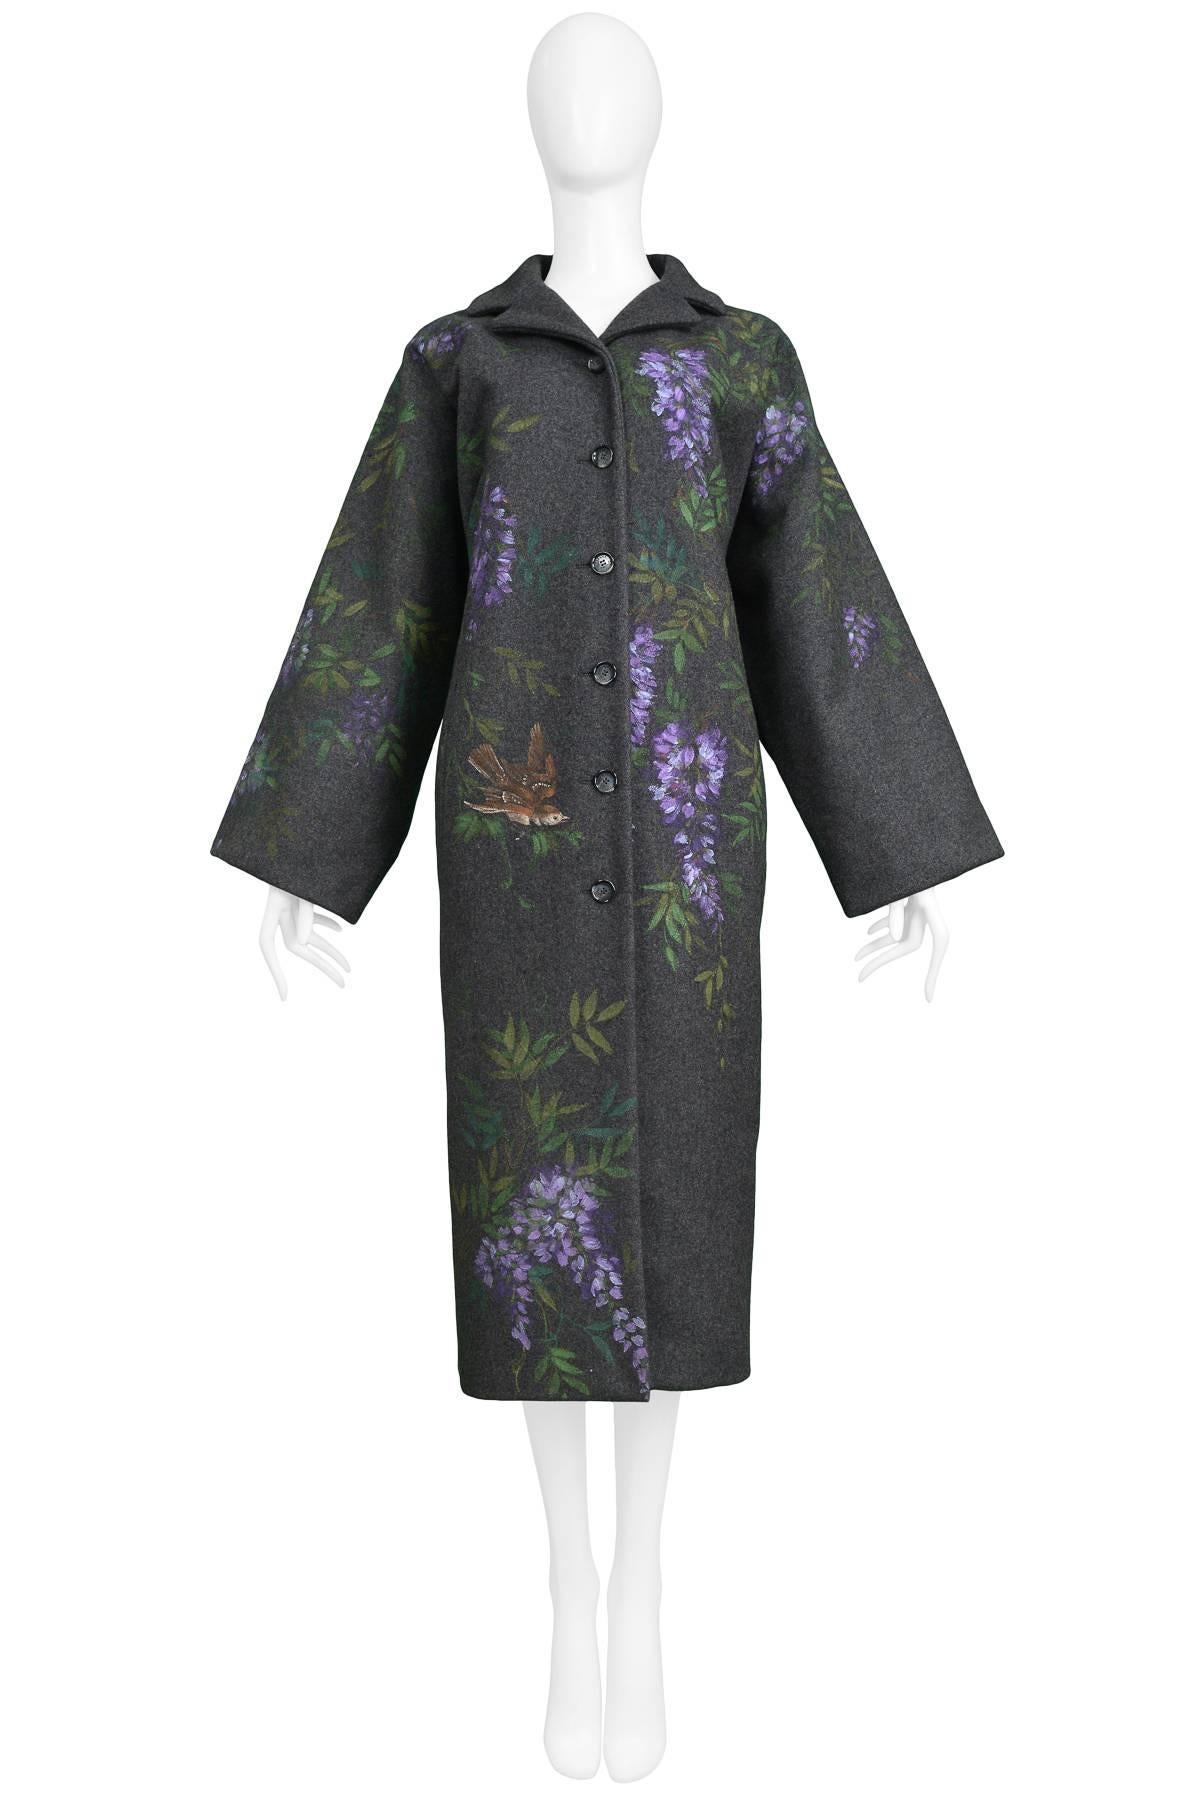 Vintage Dolce & Gabbana hand-painted flowers and birds on a grey wool kimono shaped coat. Fully lined and button front. Collection 1998.